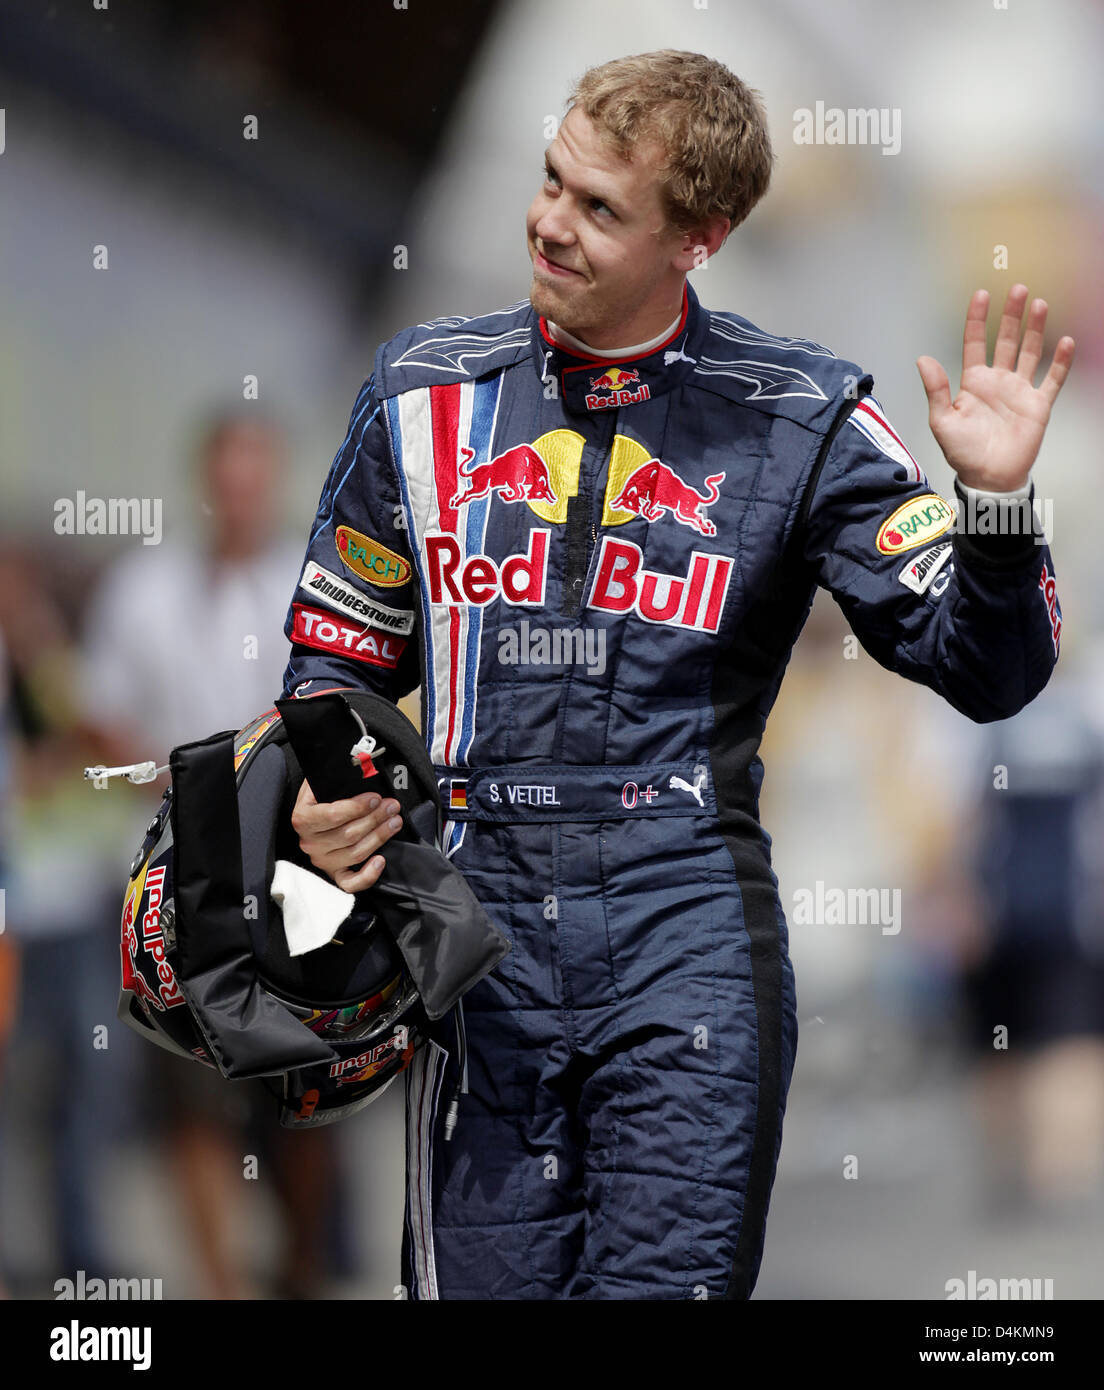 German Formula One driver Sebastian Vettel of Red Bull Racing greets to the fans while walking through the pitlane after the second practice session at Circuit de Catalunya in Montmelo near Barcelona, Spain, 08 May 2009. The Grand Prix of Spain will take place on 10 May. Photo: Felix Heyder Stock Photo